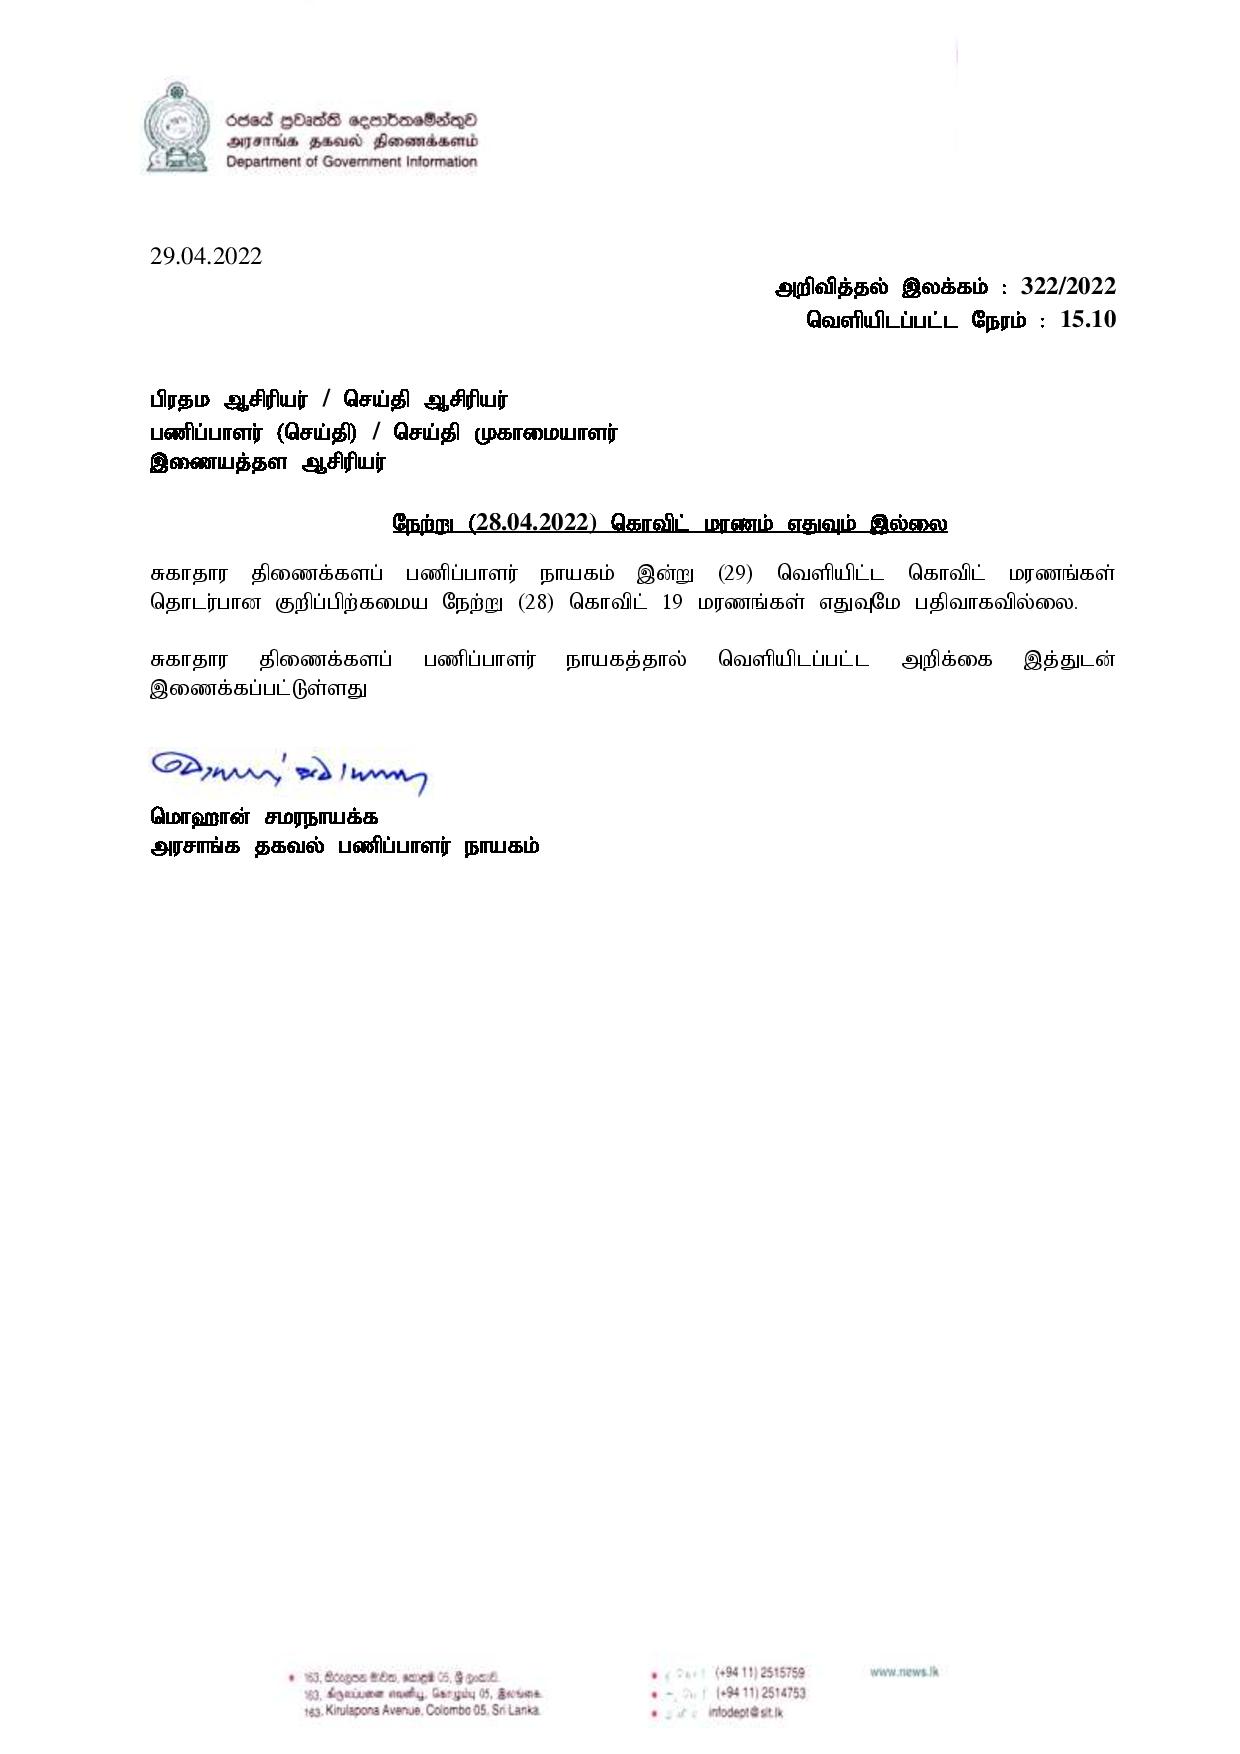 Press Release 322 Tamil page 001